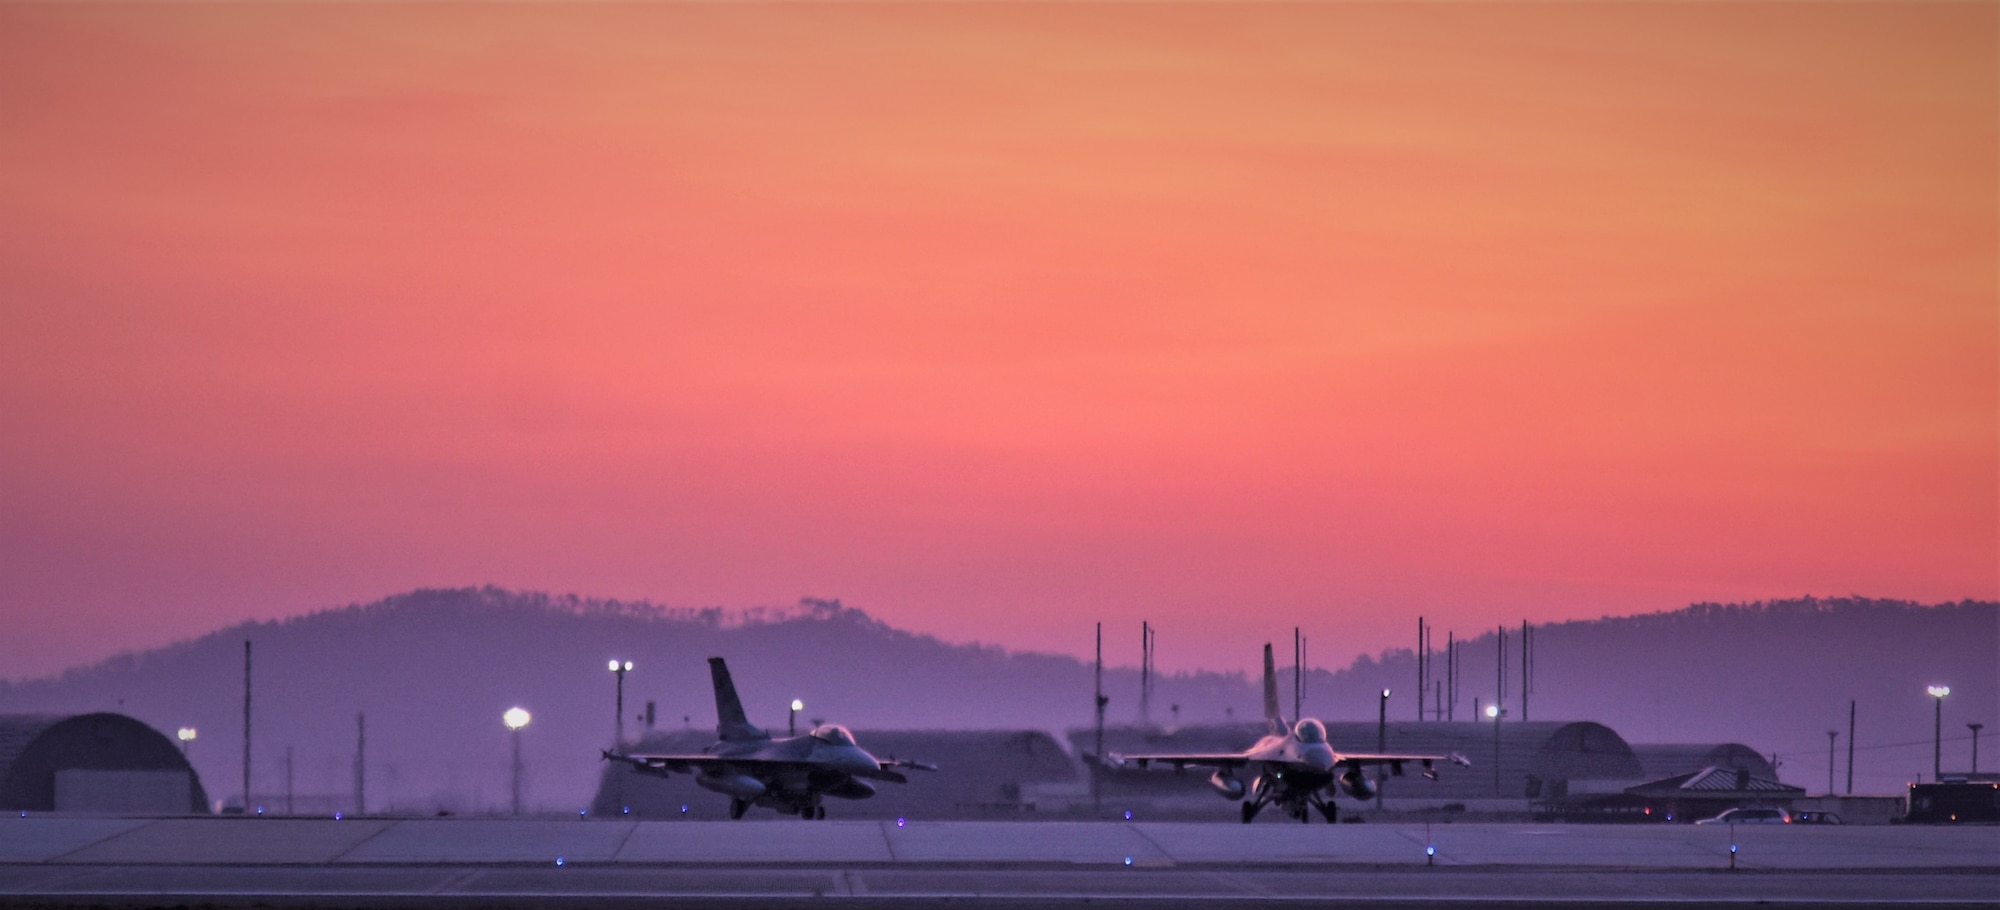 F-16 Fighting Falcons from the 8th Fighter Wing, taxi before take-off during a training event at Kunsan Air Base, Republic of Korea, March 24, 2021. The F-16 Fighting Falcon is a compact, multi-role fighter aircraft that is highly maneuverable in air-to-air combat and air-to-surface attack. It can reach top speeds of 1,500 mph and can reach altitudes of more than 50,000 feet. (U.S. Air Force photo by Tech. Sgt. Kristin S. High)